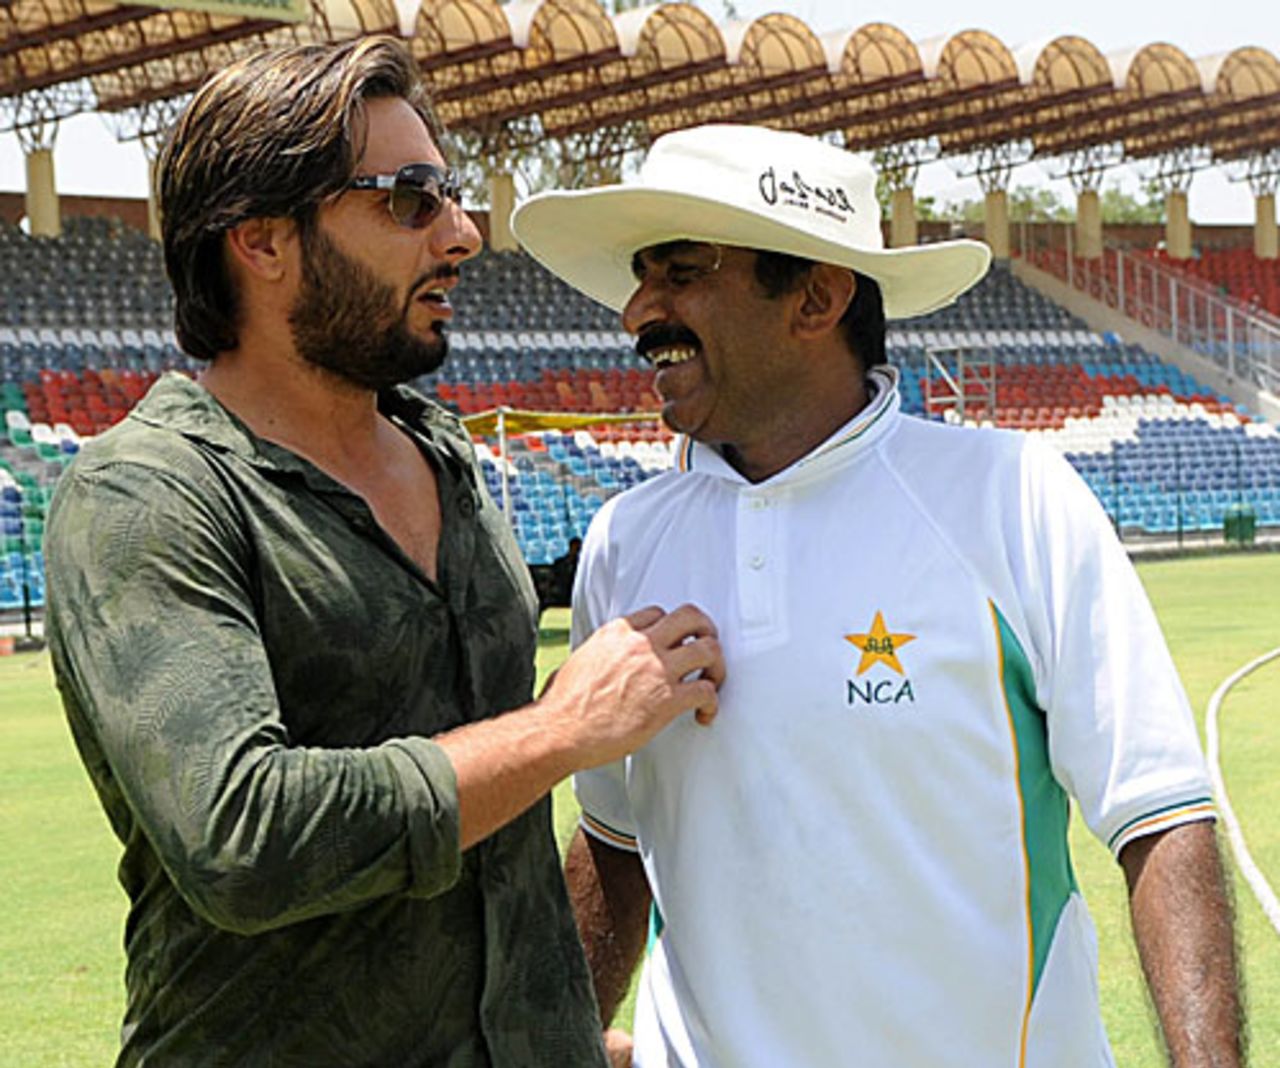 Shahid Afridi shares a light moment with Javed Miandad, Lahore, May 25, 2010